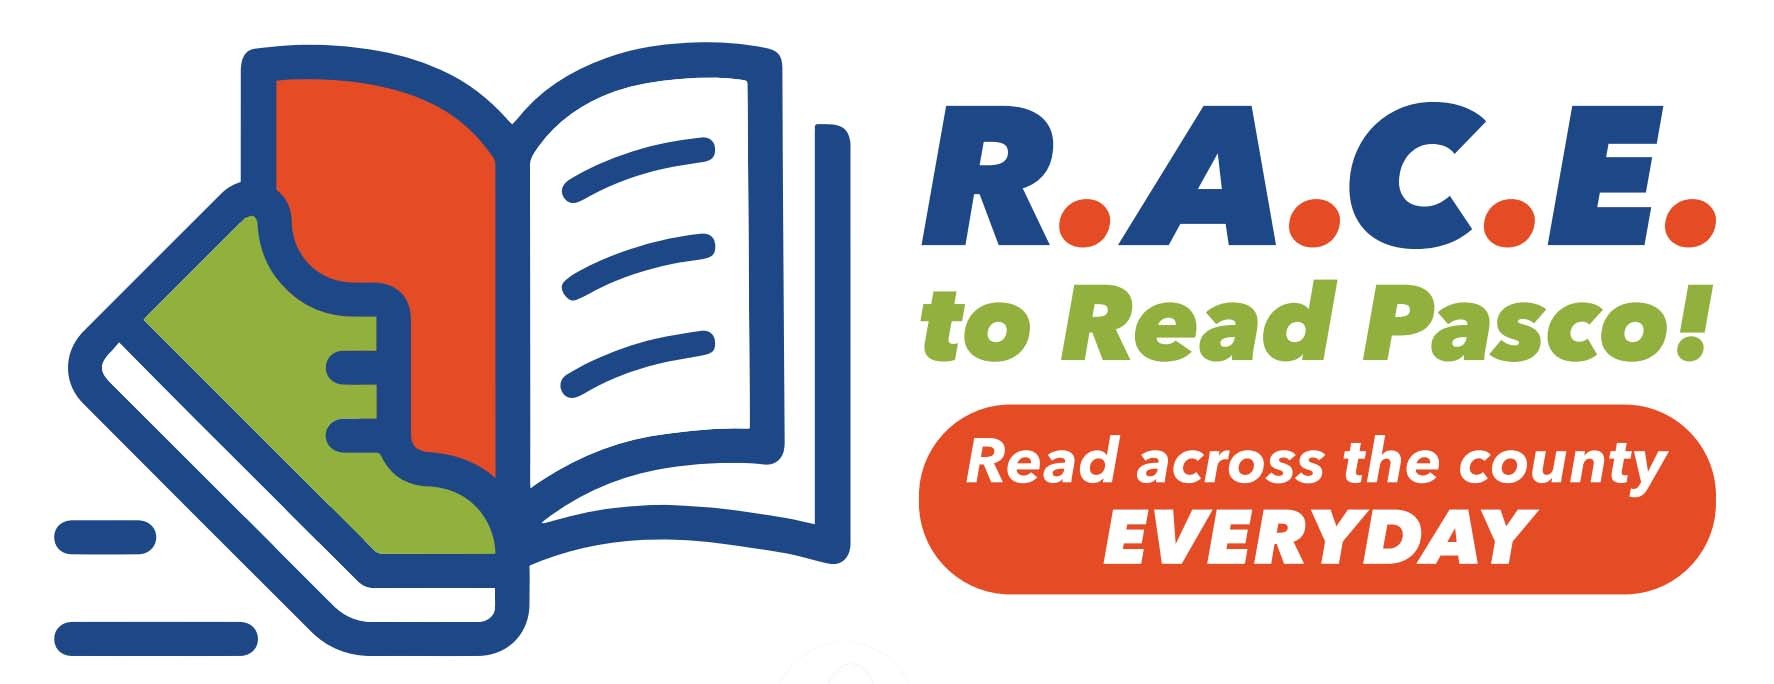 R.A.C.E. to Read 蜜桃传媒! Read across the county every day